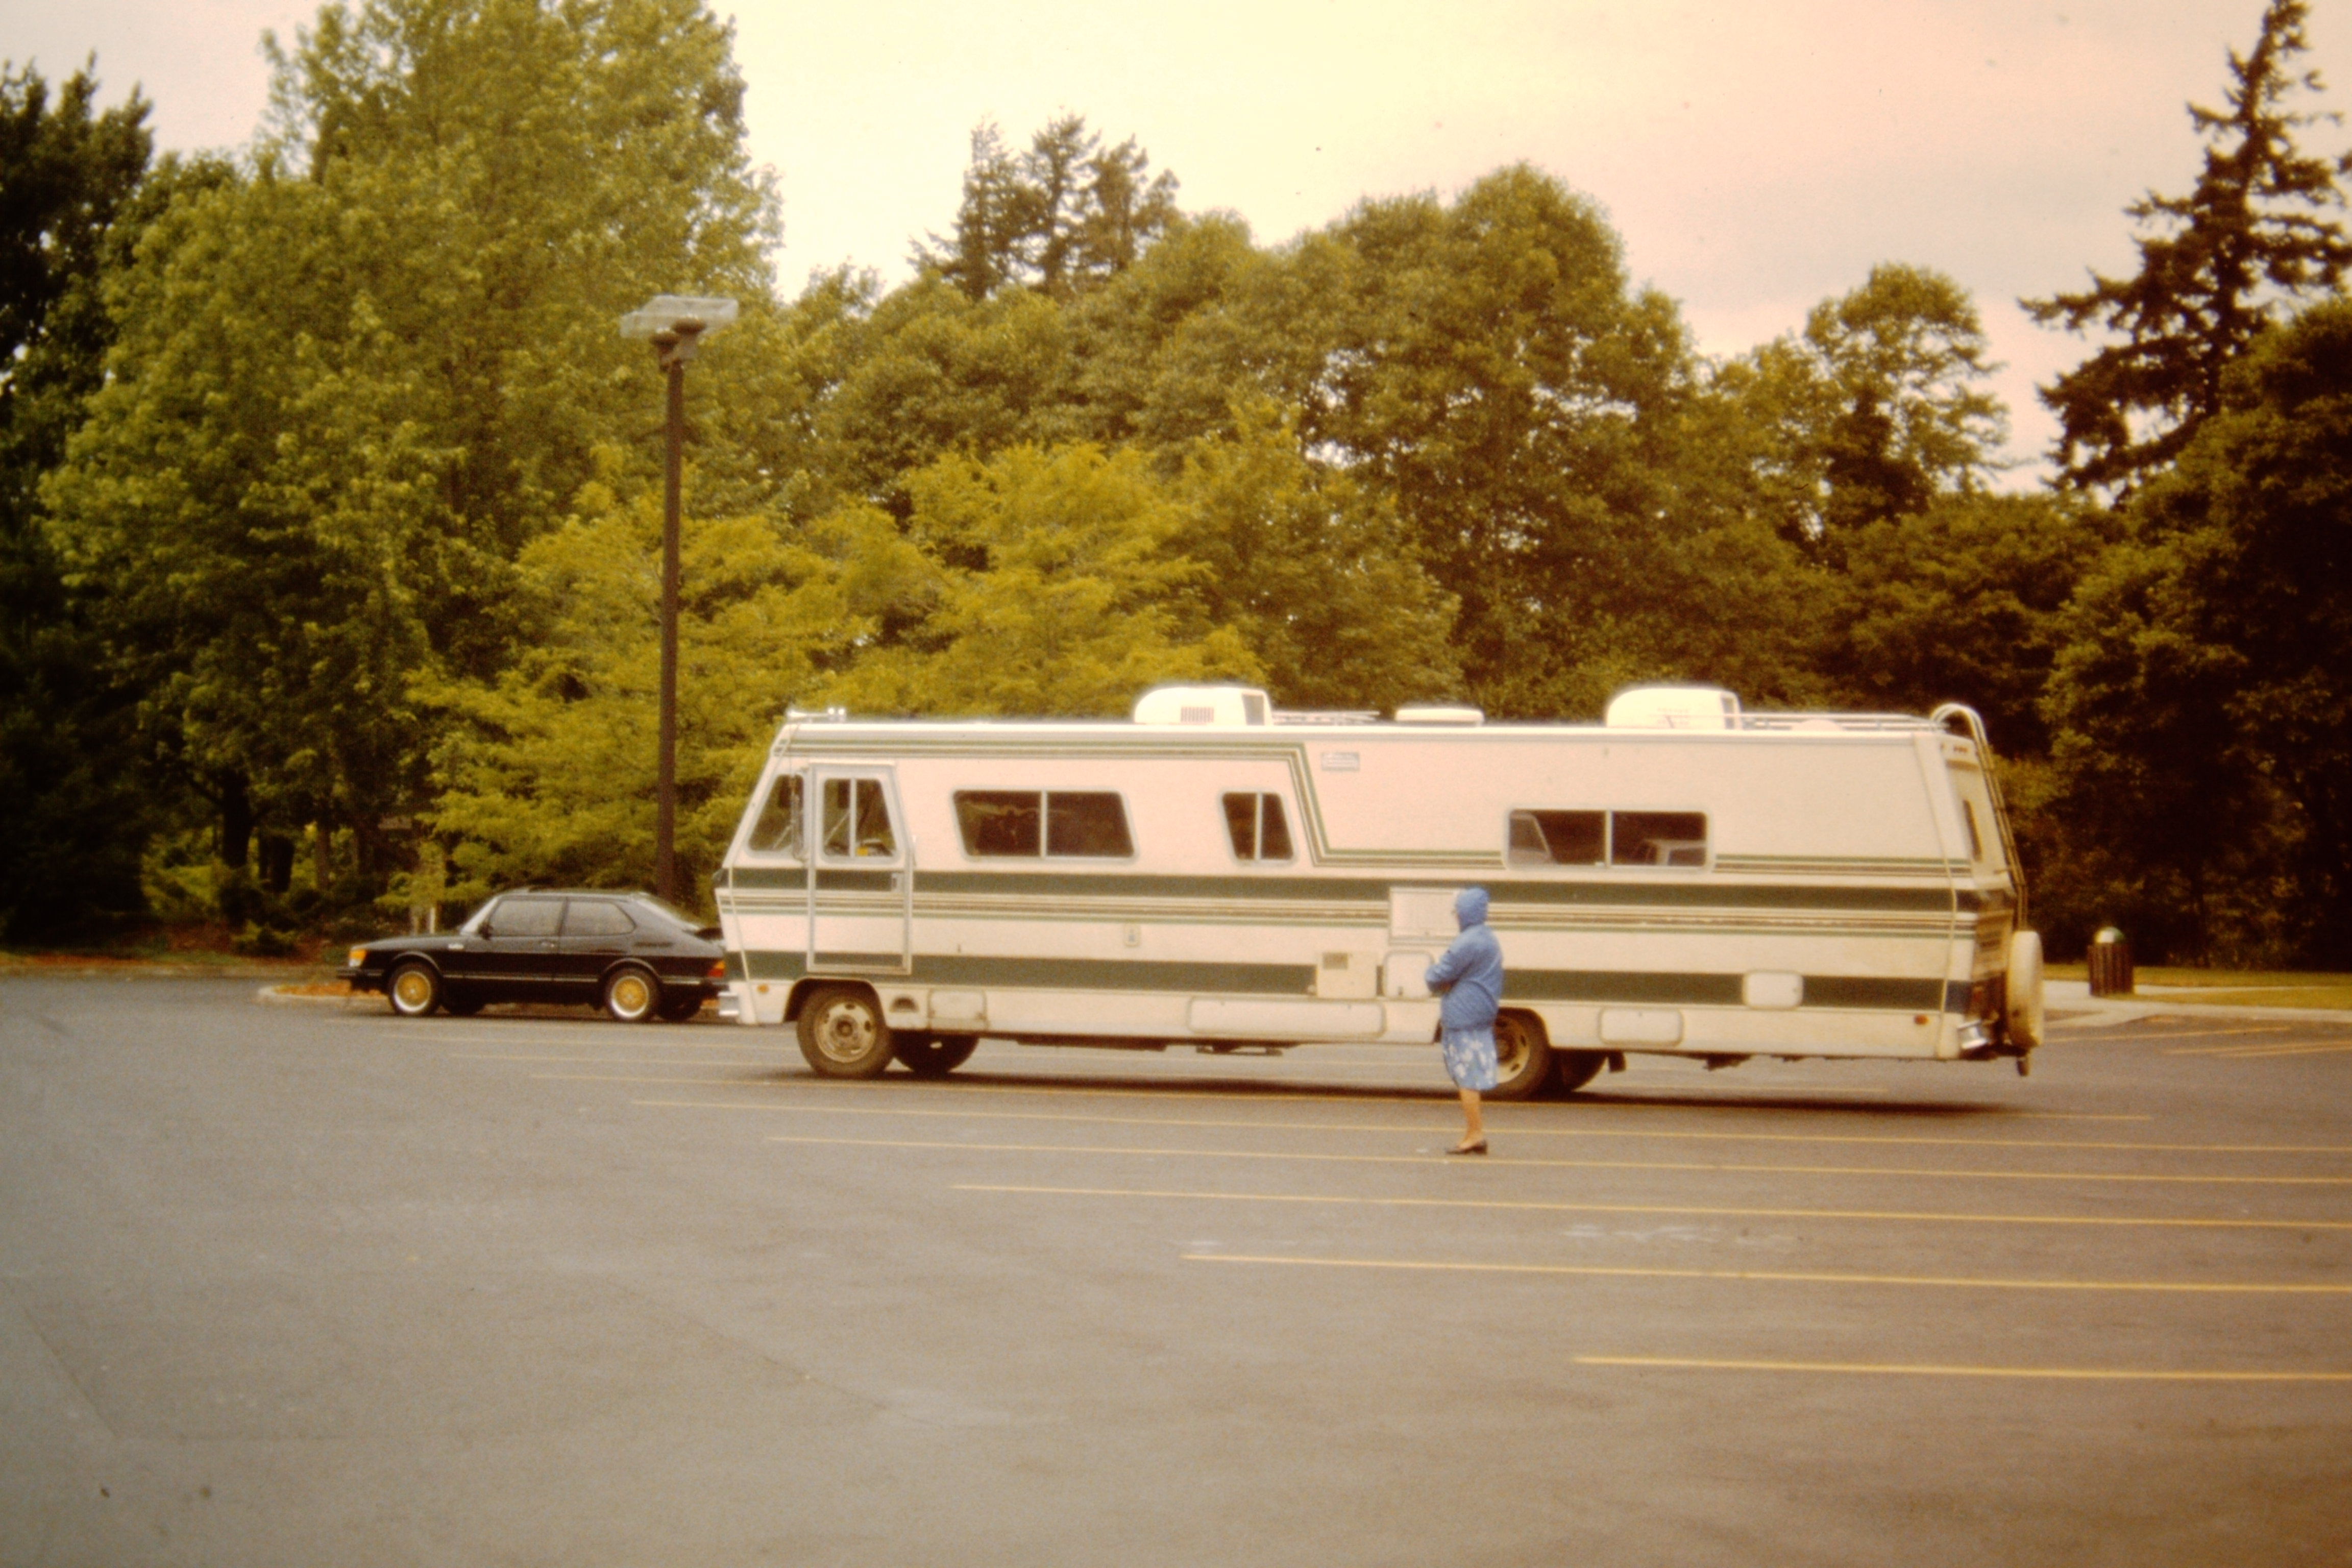 Old motorhome parked in parking lot.